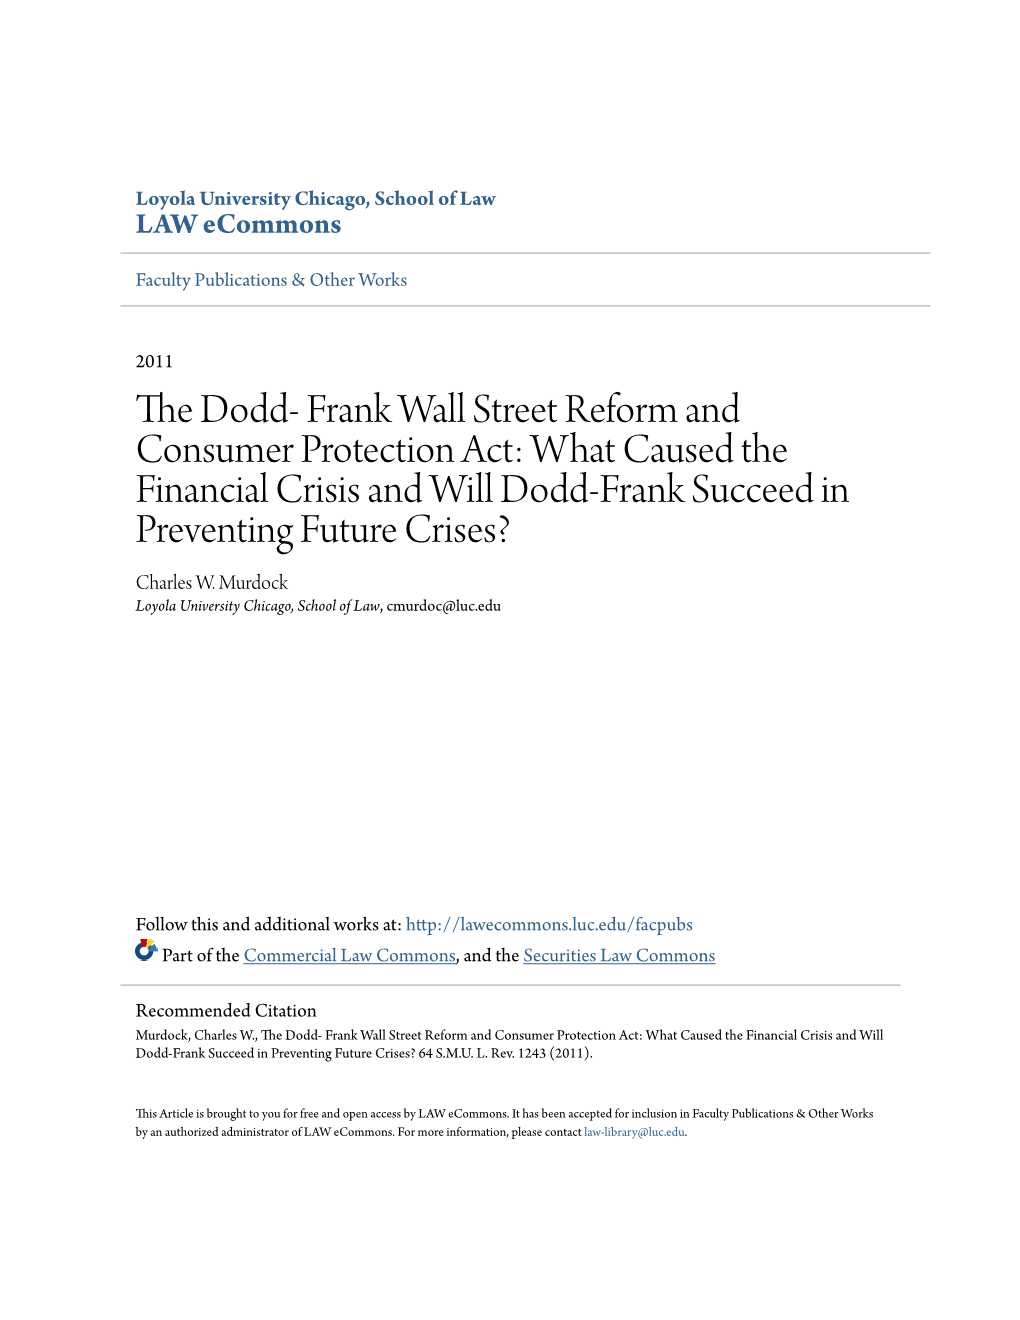 The Dodd- Frank Wall Street Reform and Consumer Protection